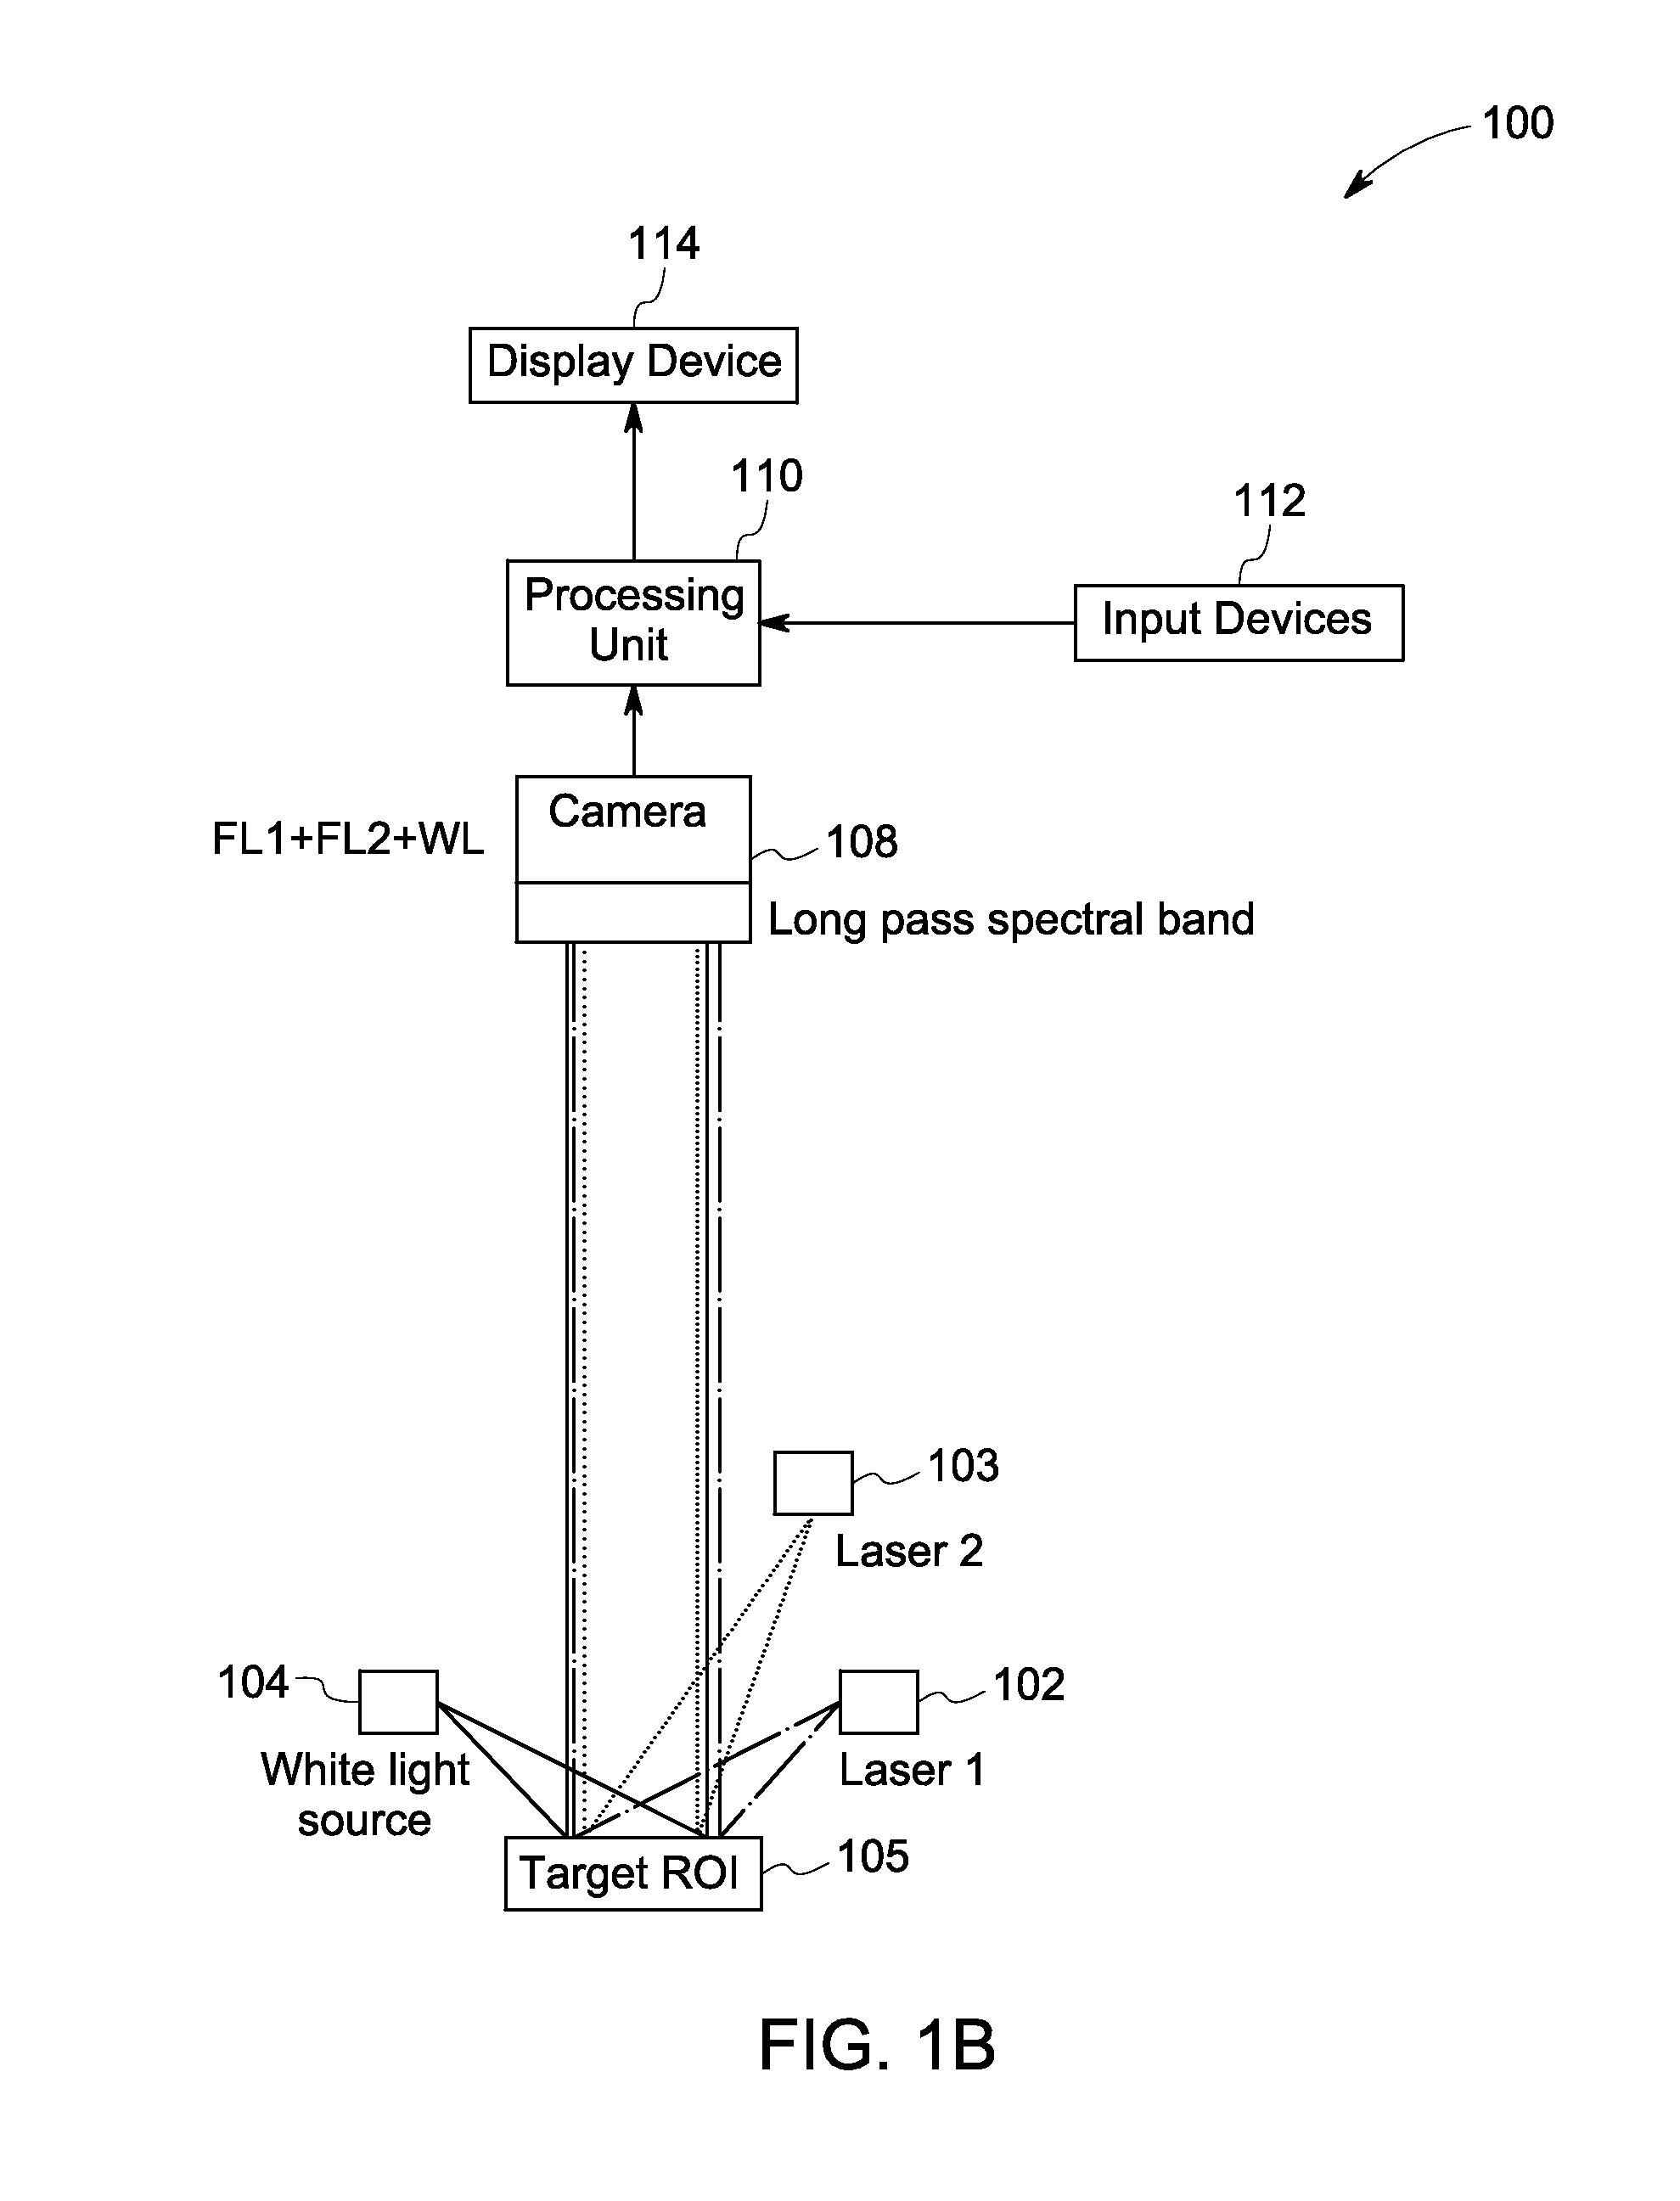 Systems and methods for nerve imaging